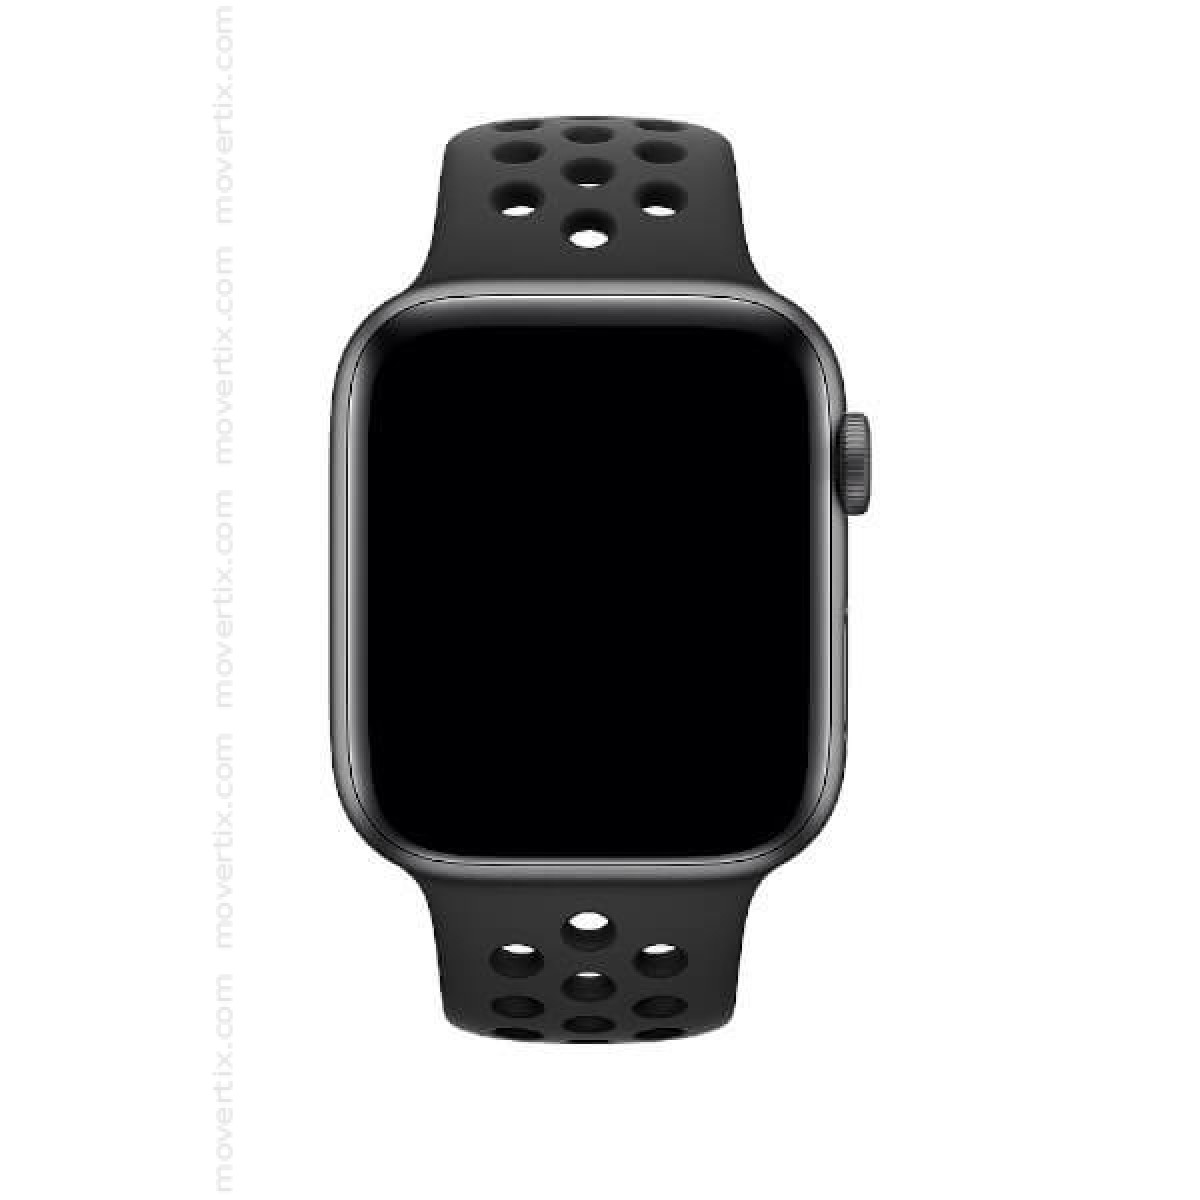 Apple Watch Nike+ Series 4 (GPS+Cellular) 44mm Space Grey with Black Nike  Band - MTXM2TY/A (0190198913401) | Movertix Mobile Phones Shop